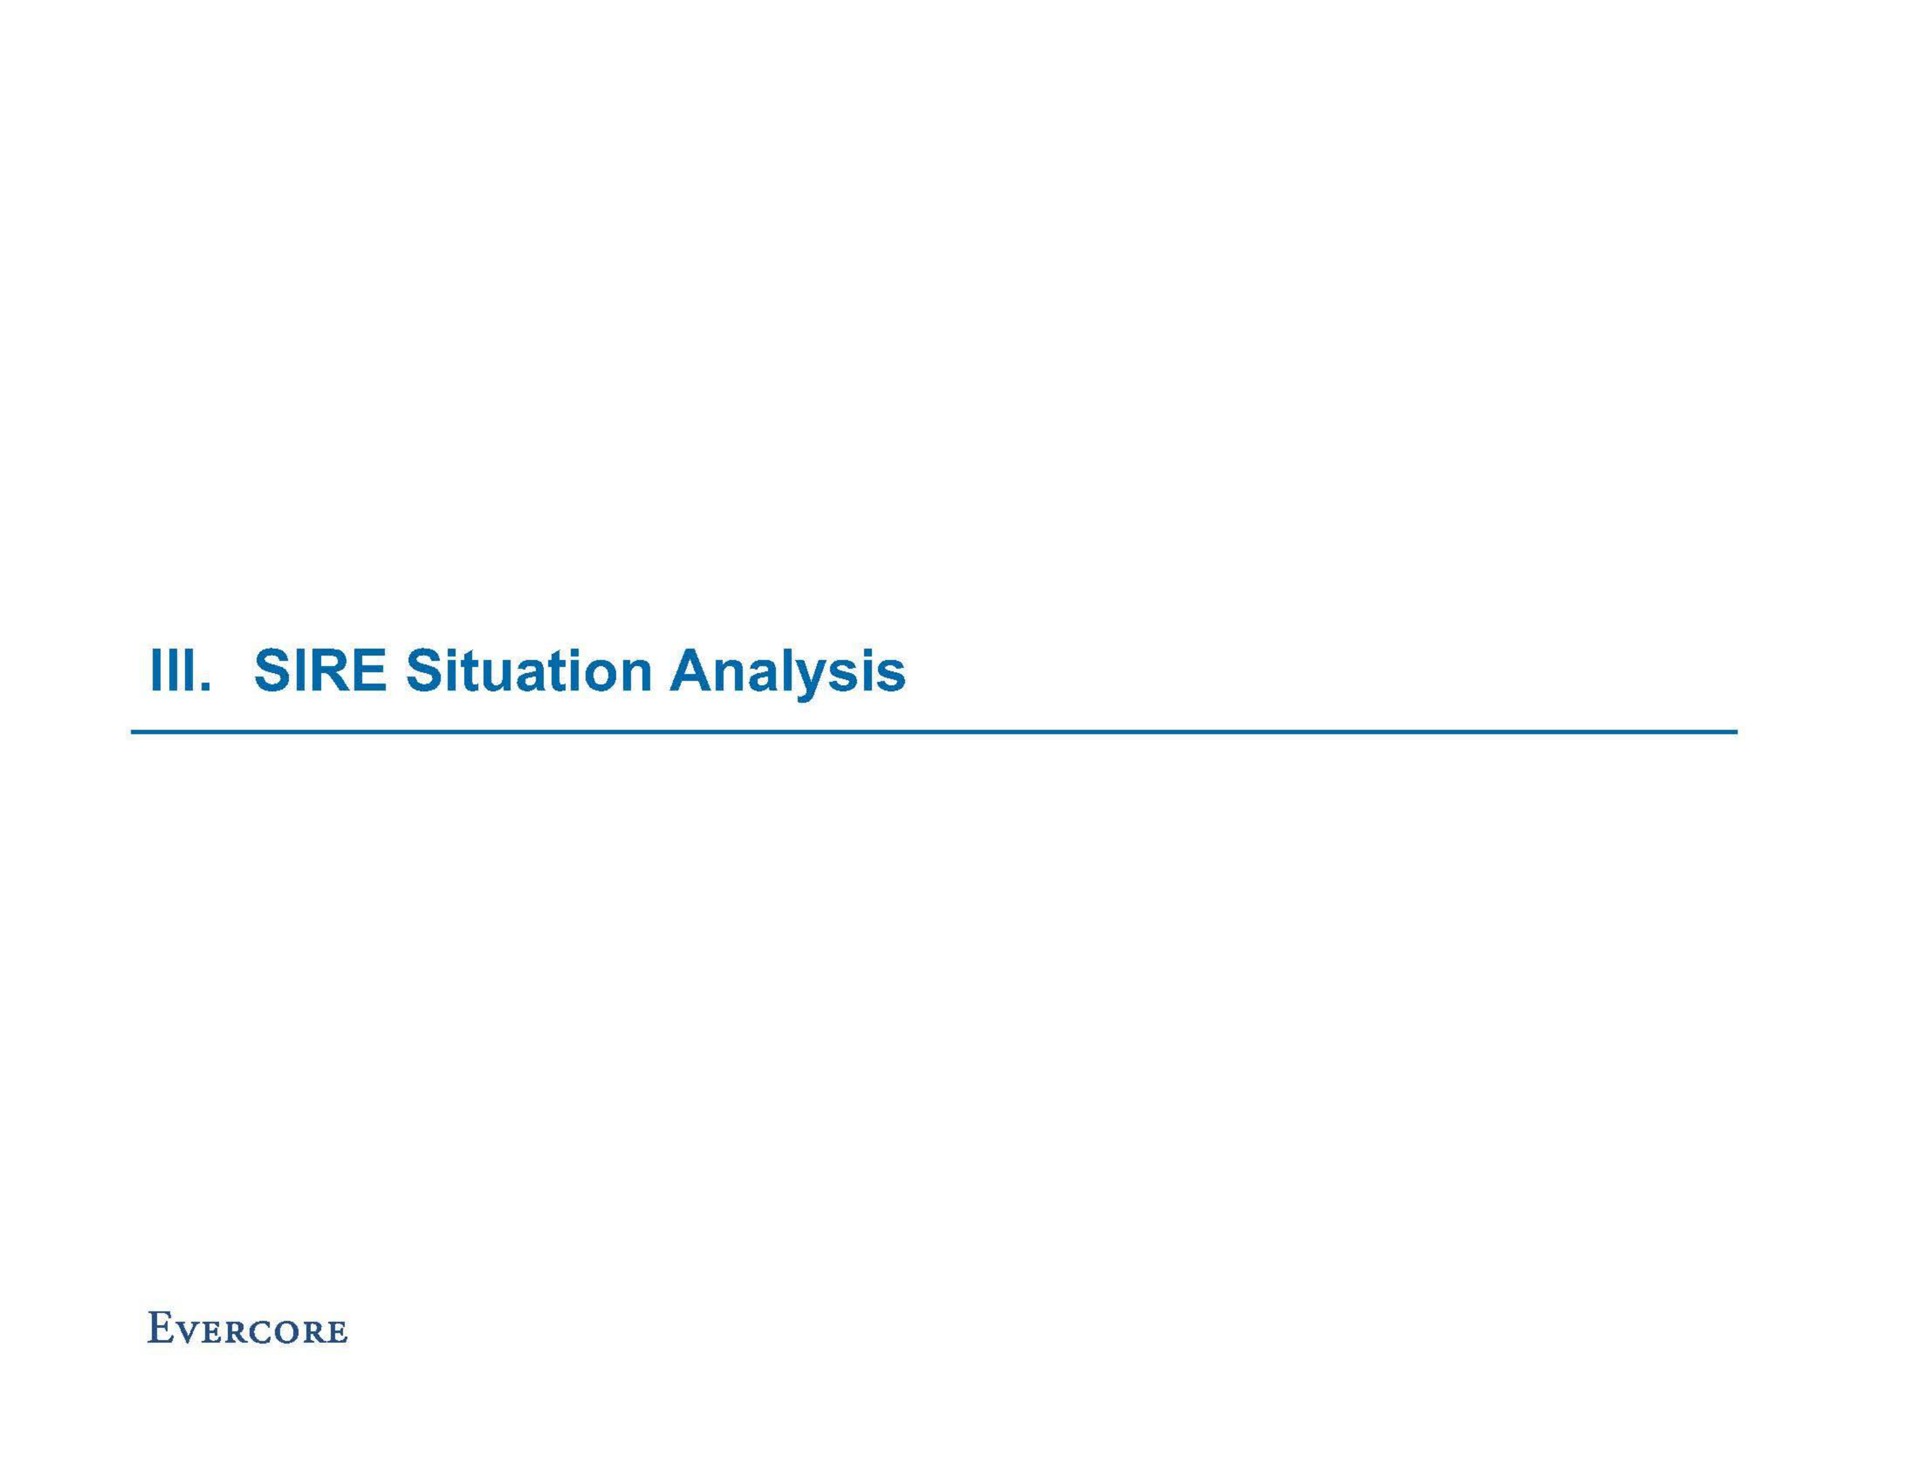 sire situation analysis | Evercore